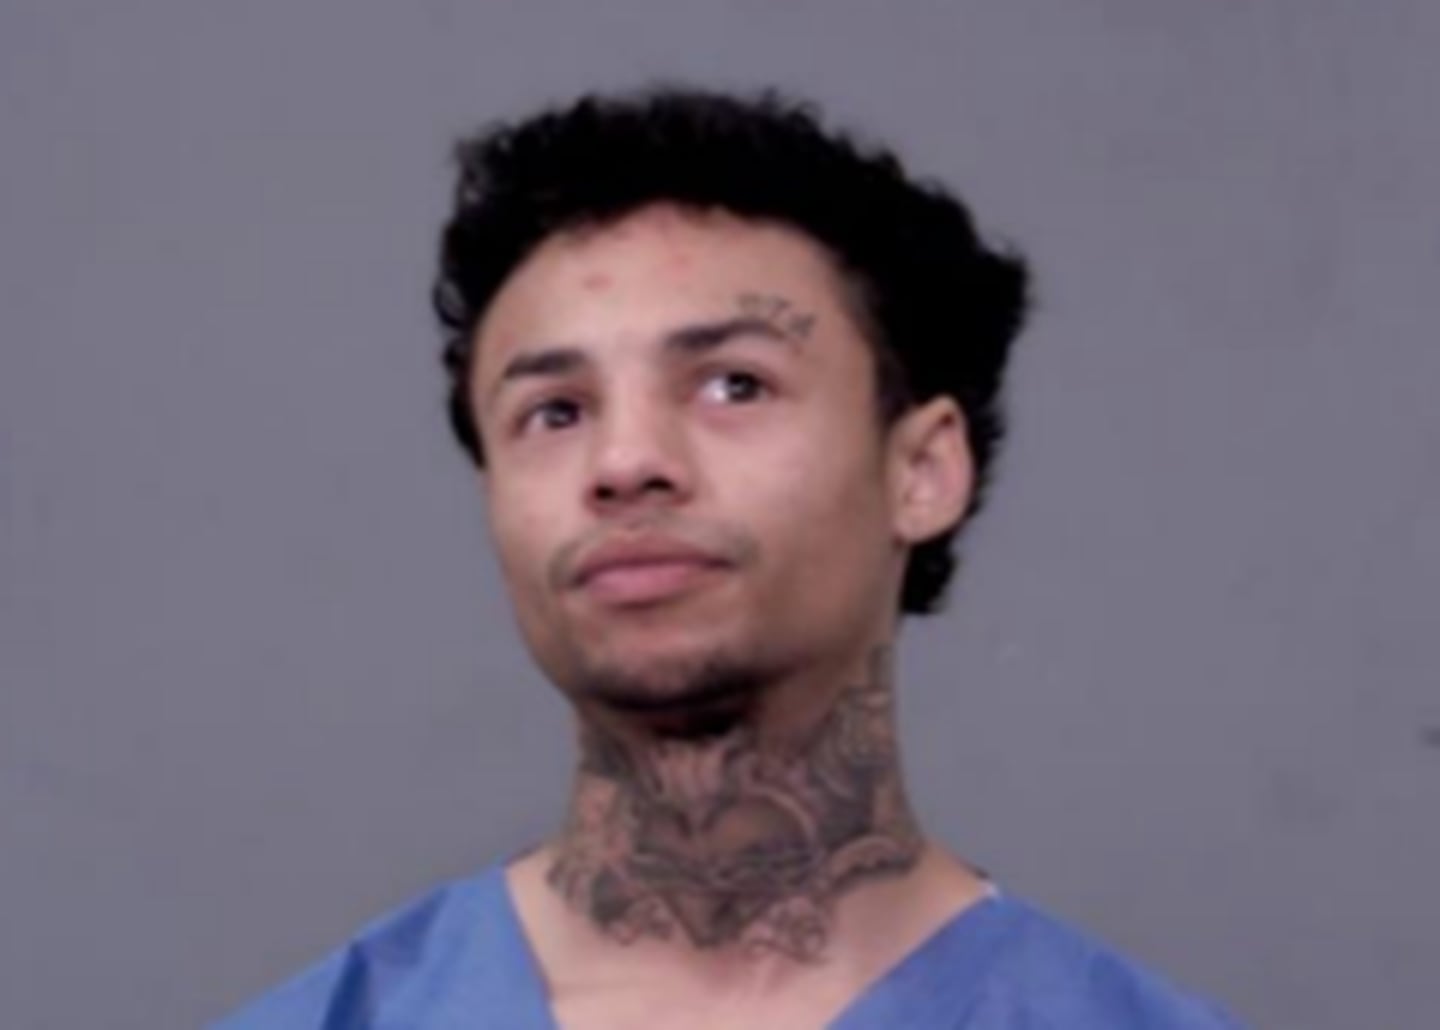 Isiah Requena, 22, of Plainfield. Arrested by Joliet police on Dec. 31, 2022. Jan. 1, 2023.